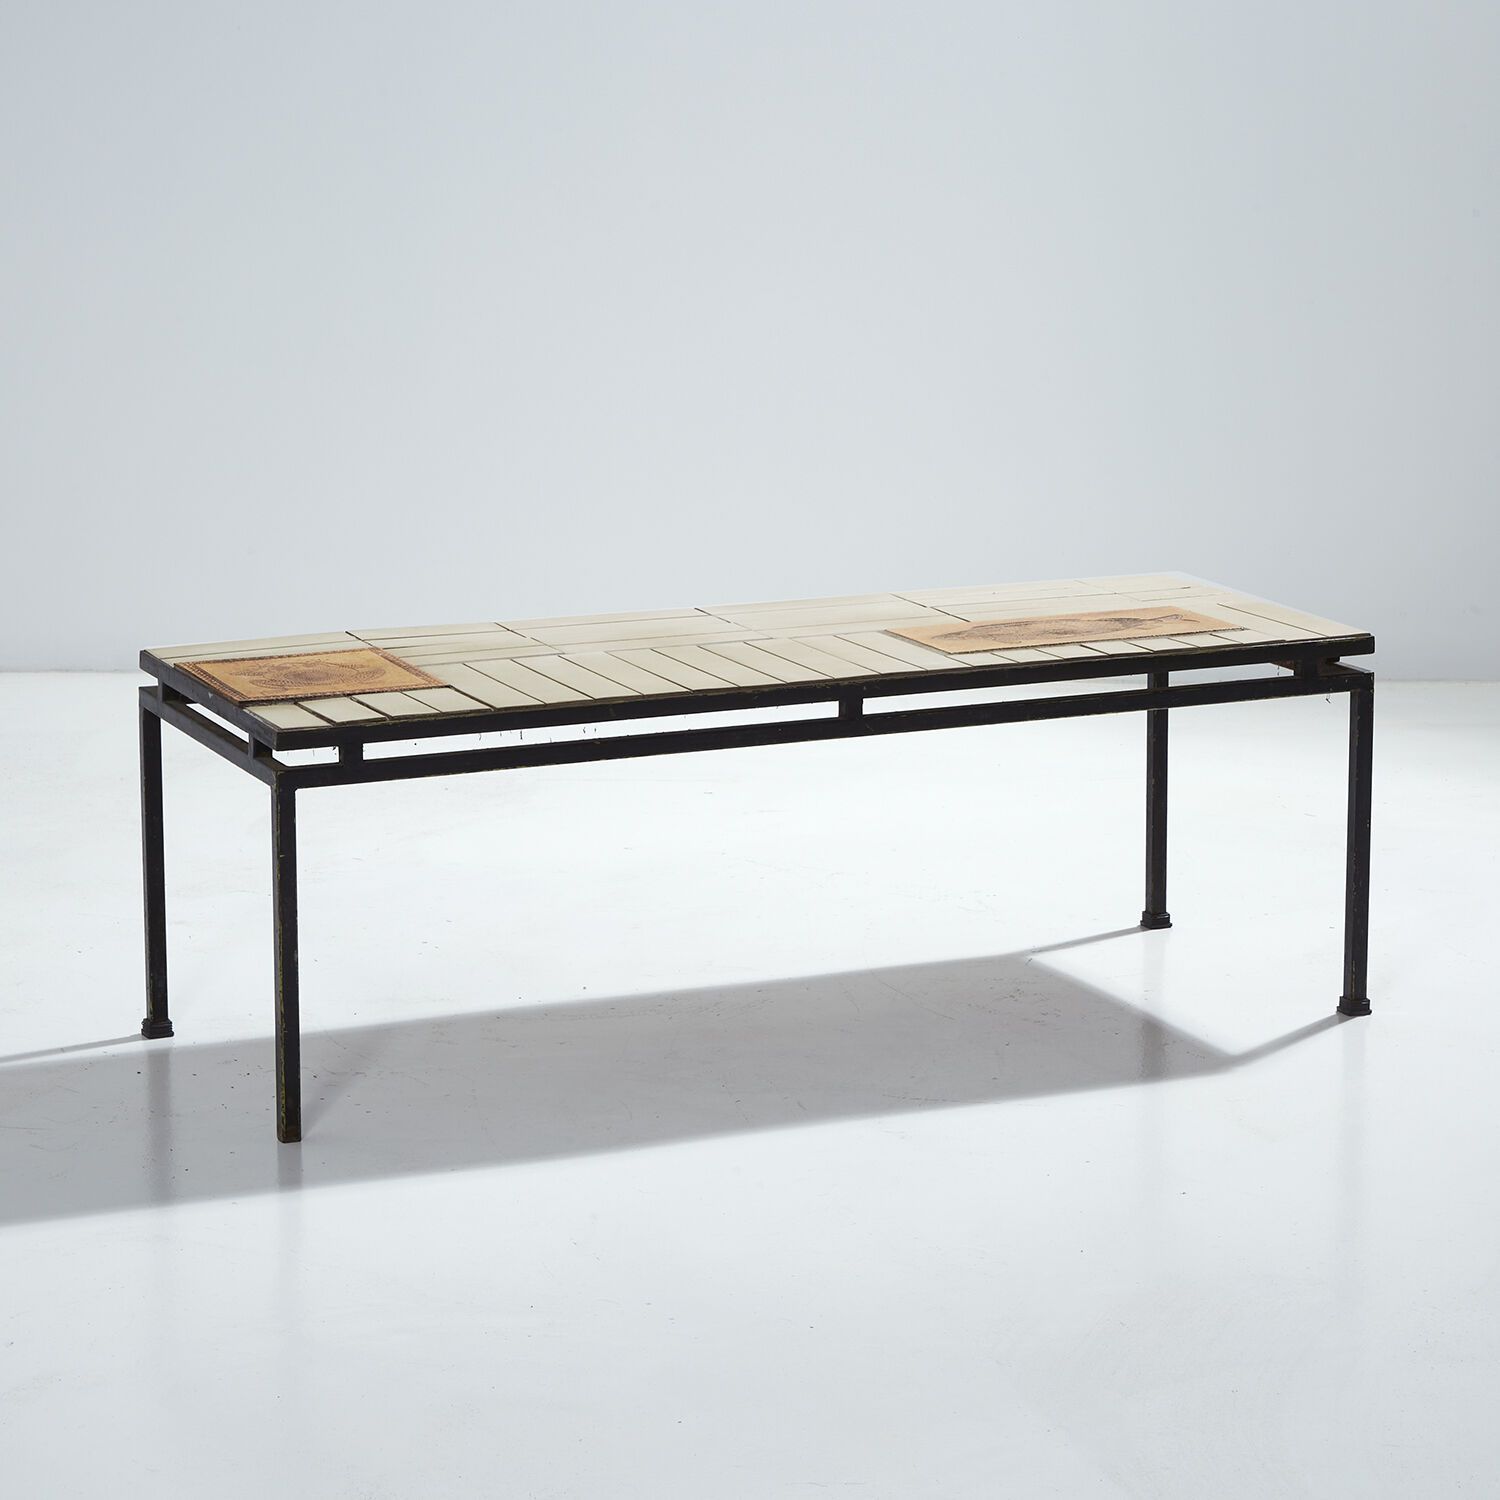 ROGER CAPRON (1922-2006) ROGER CAPRON (1922-2006)
Rectangular coffee table with &hellip;